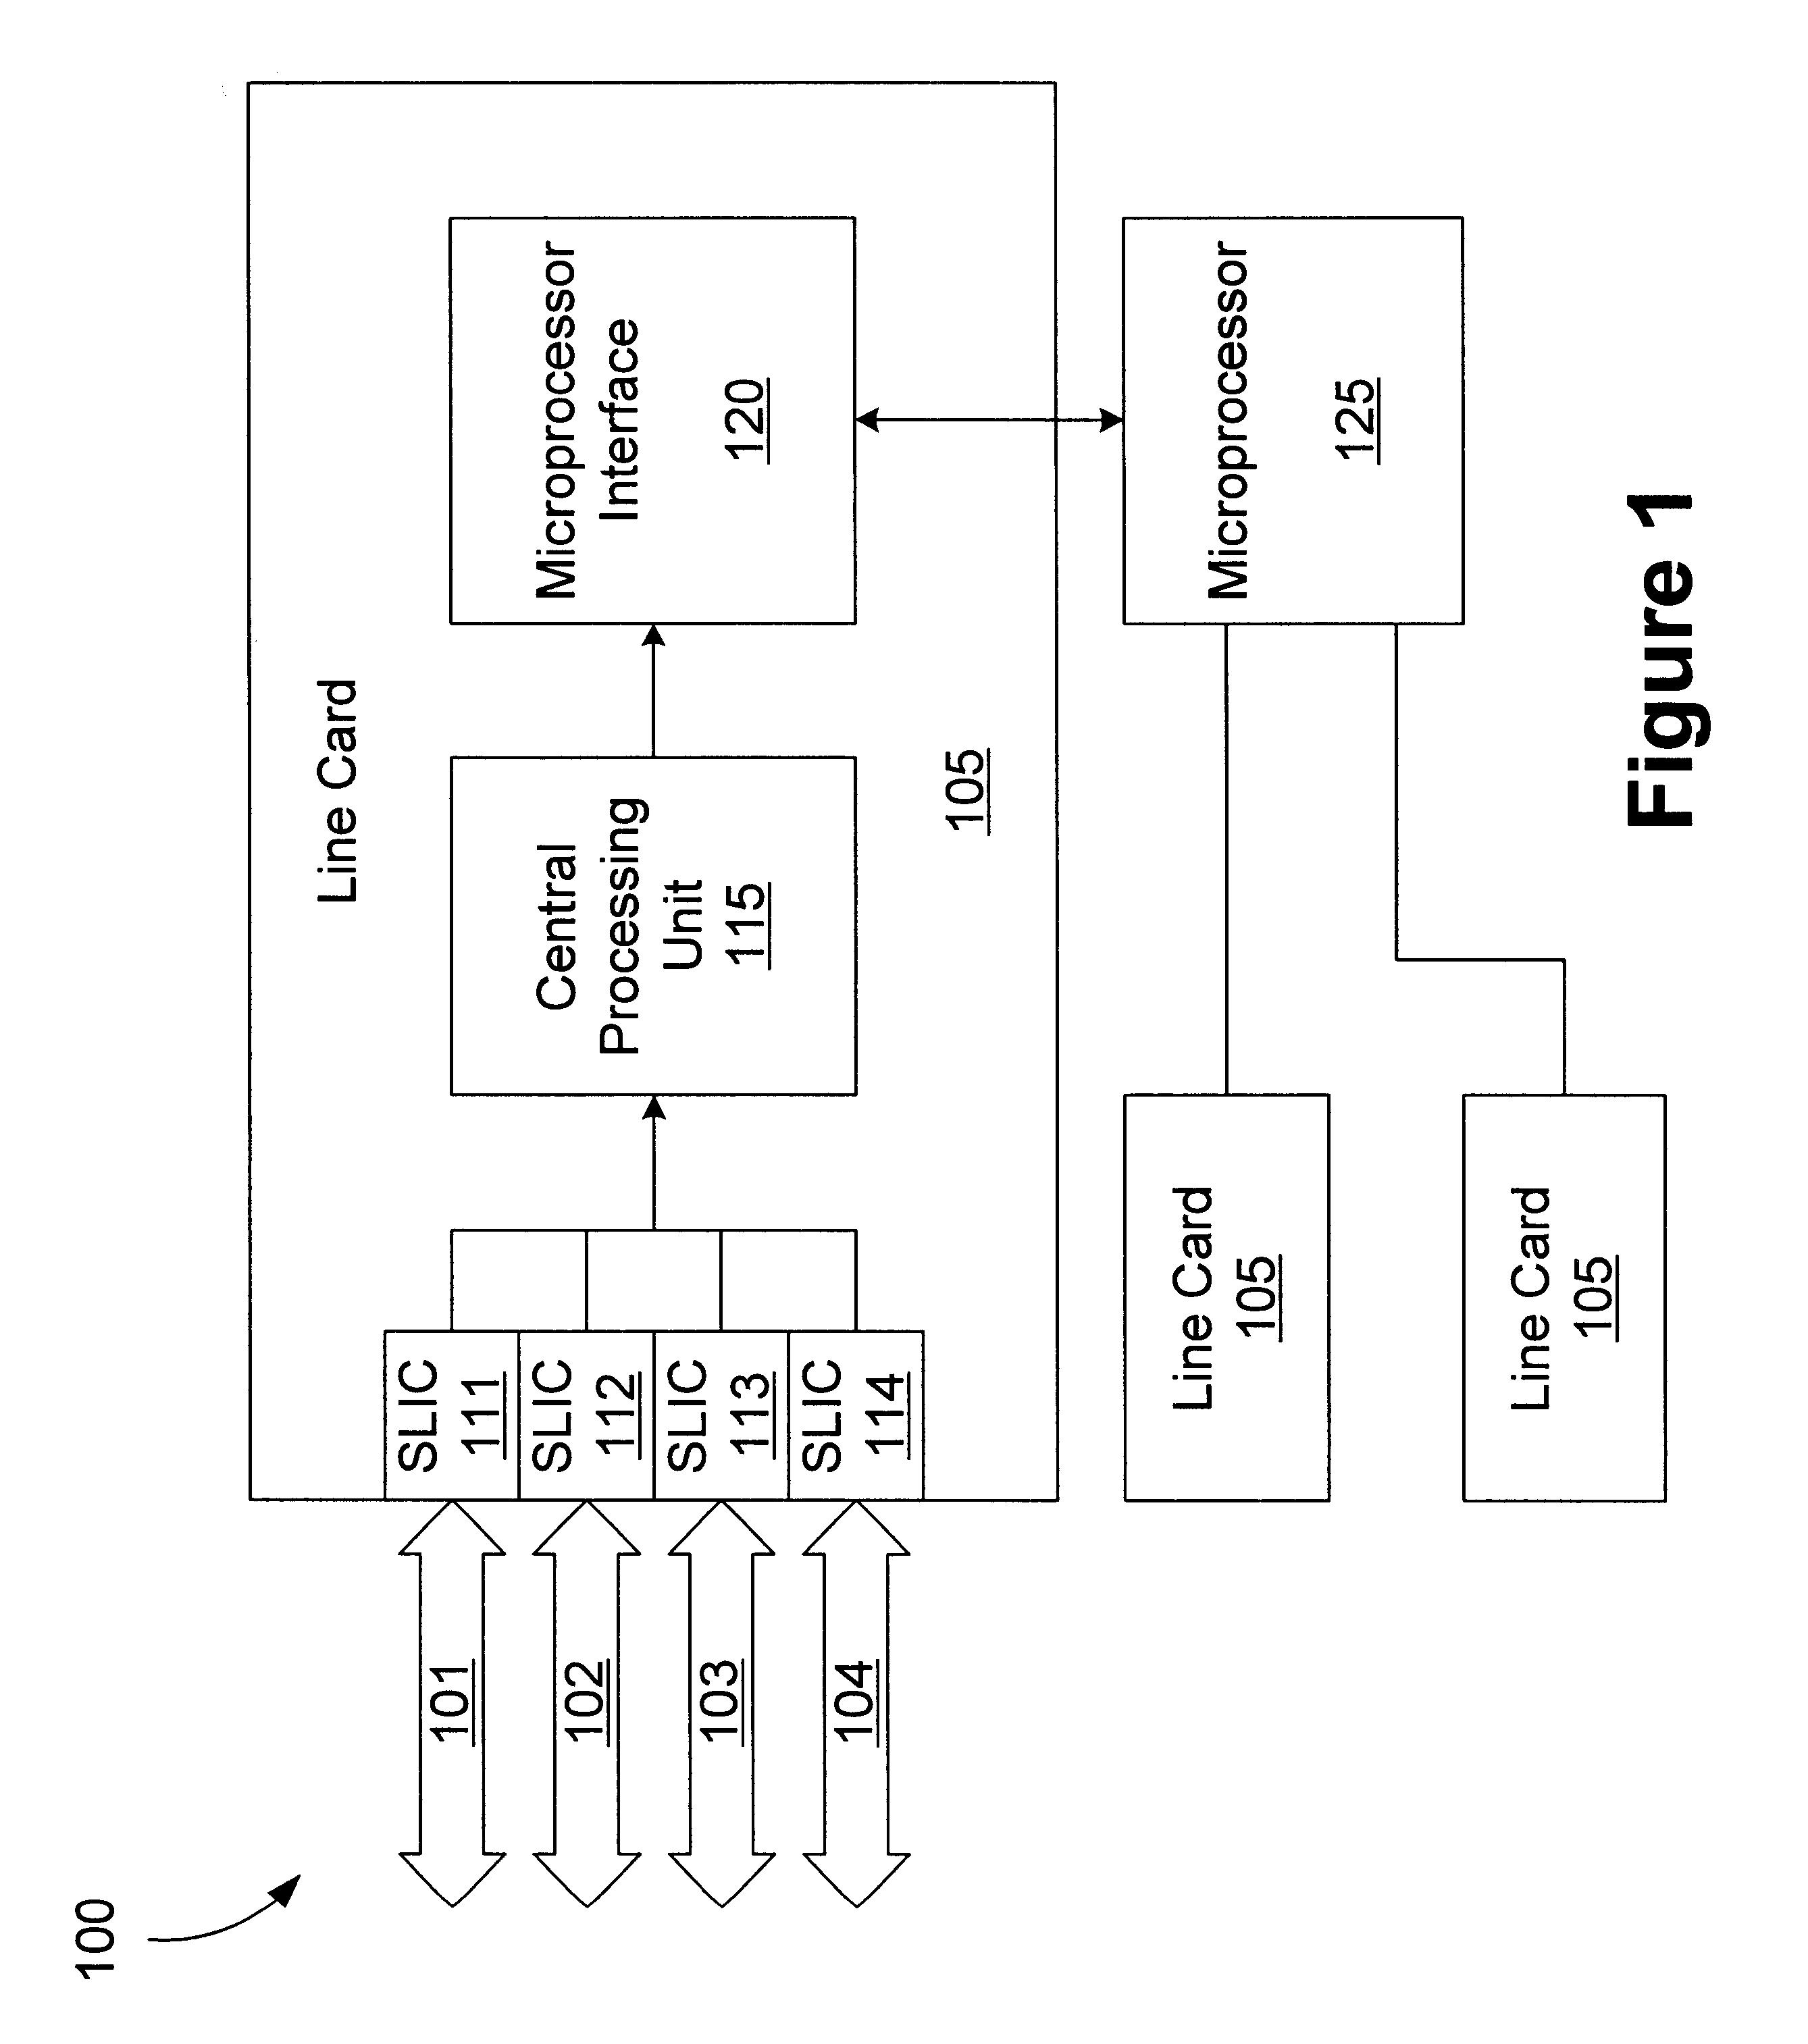 Method and apparatus for prioritizing interrupts in a communication system